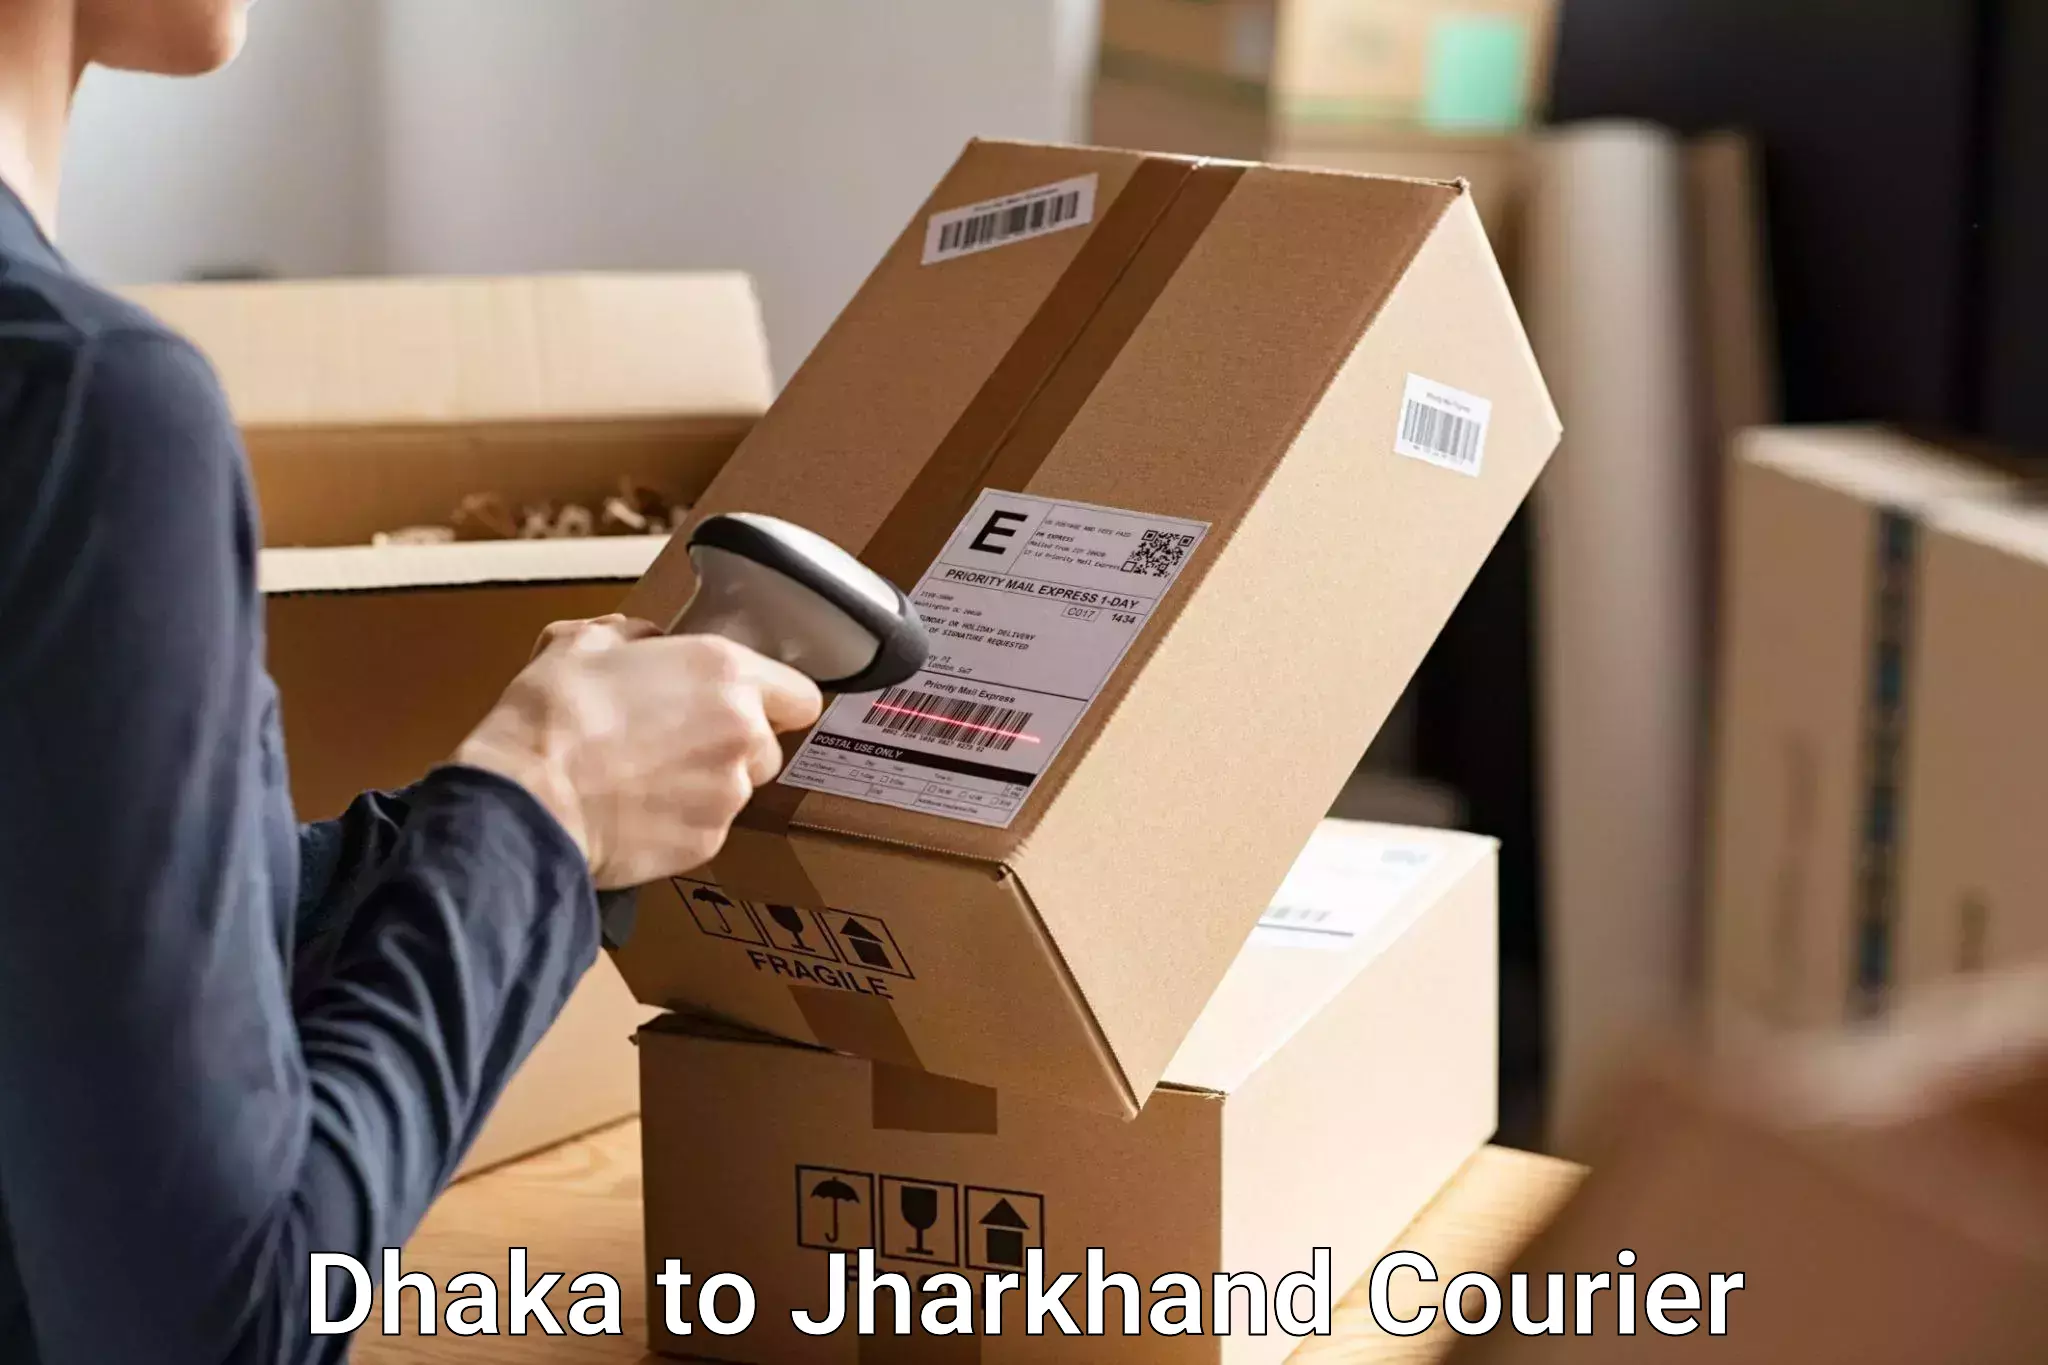 Luggage transport consulting Dhaka to Jharkhand